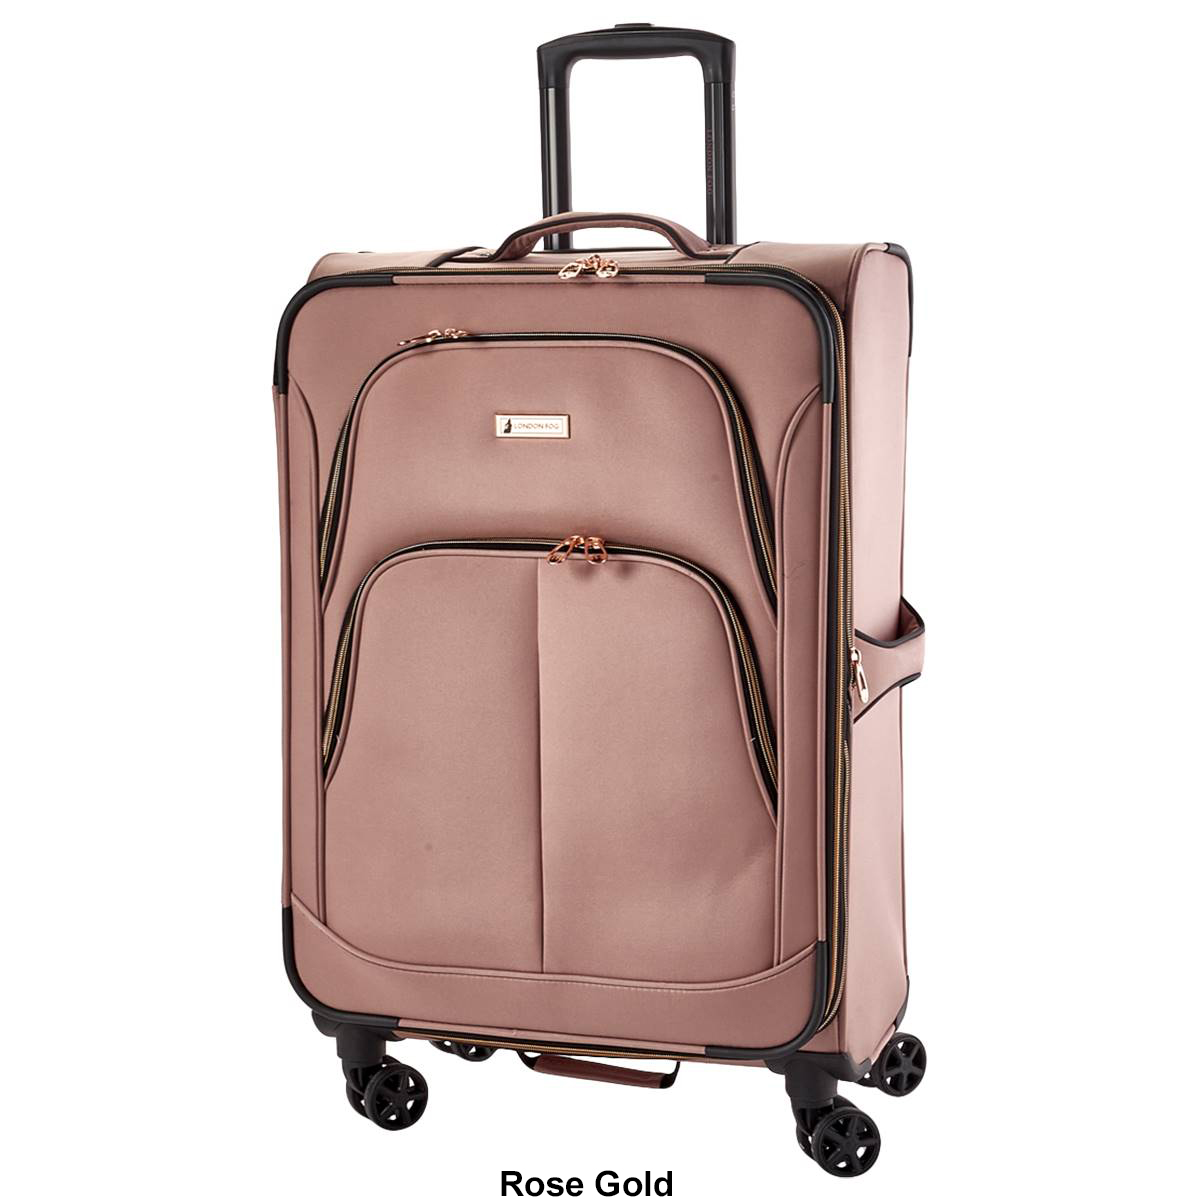 London Fog Bromley 25in. Spinner Luggage